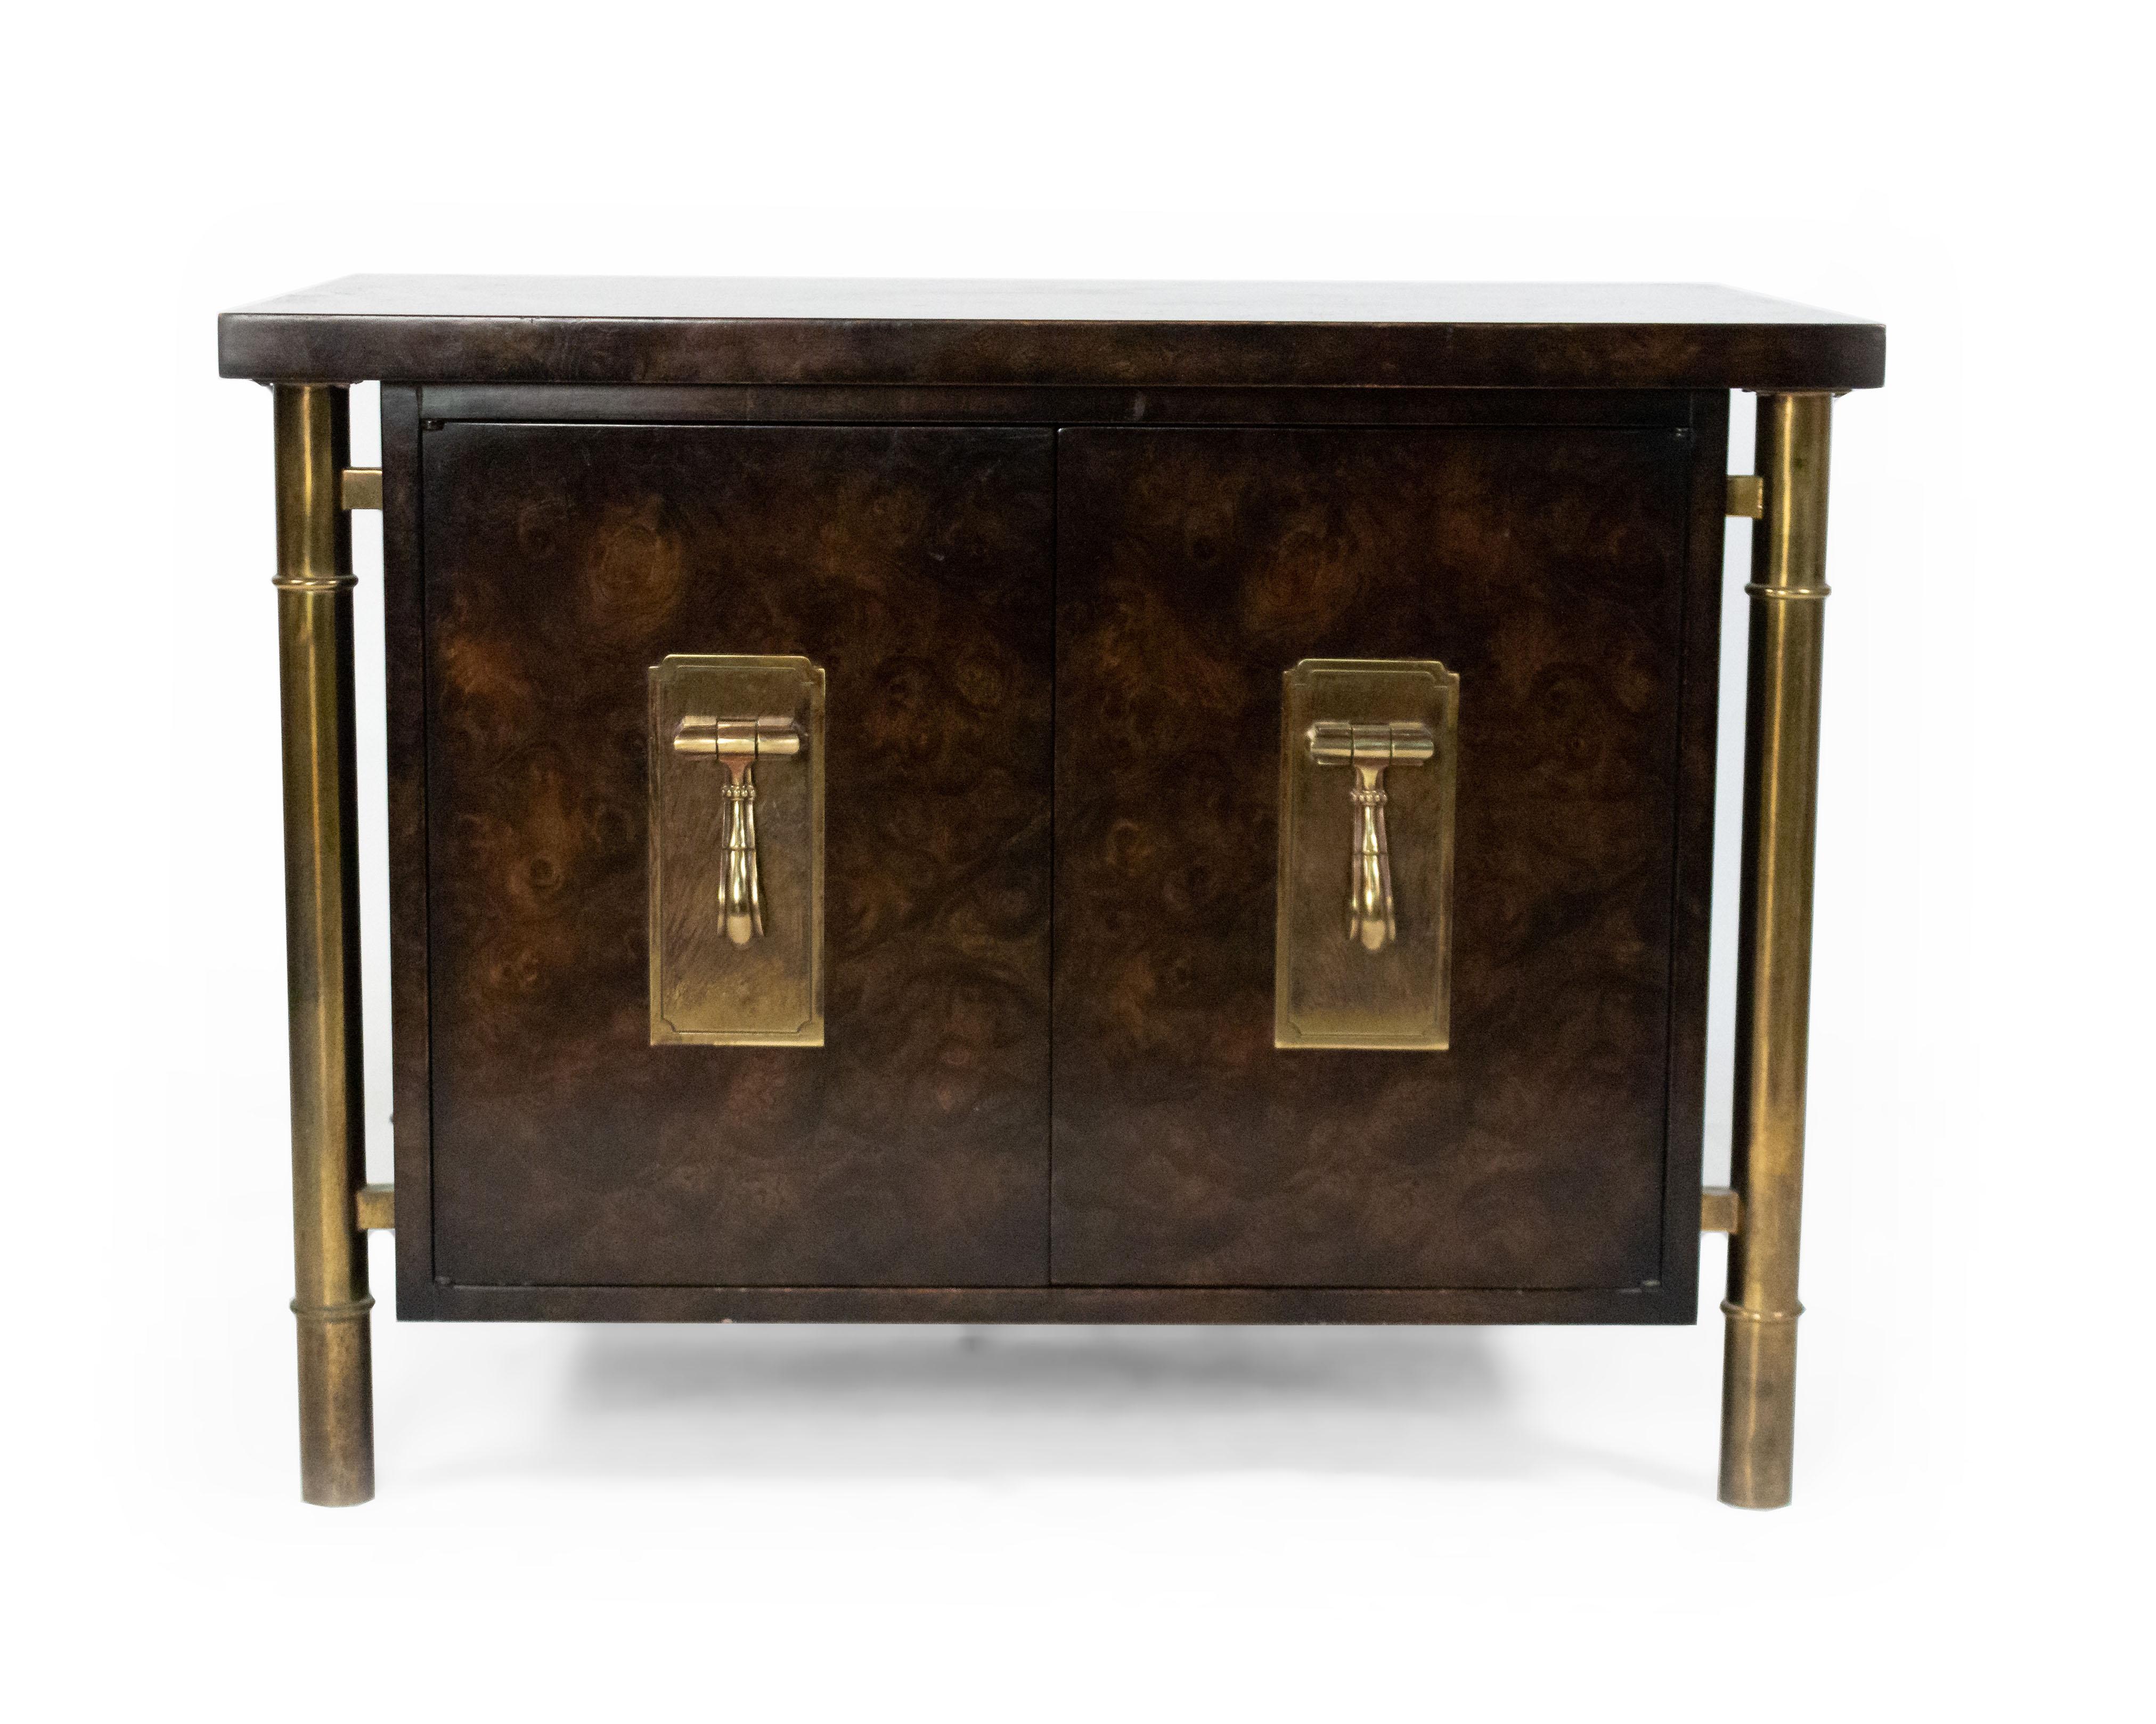 Pair of Mid-Century William Doezema for Mastercraft dark burl elm side tables circa 1960s with two doors, patinated brass drop pulls and cylindrical brass legs.